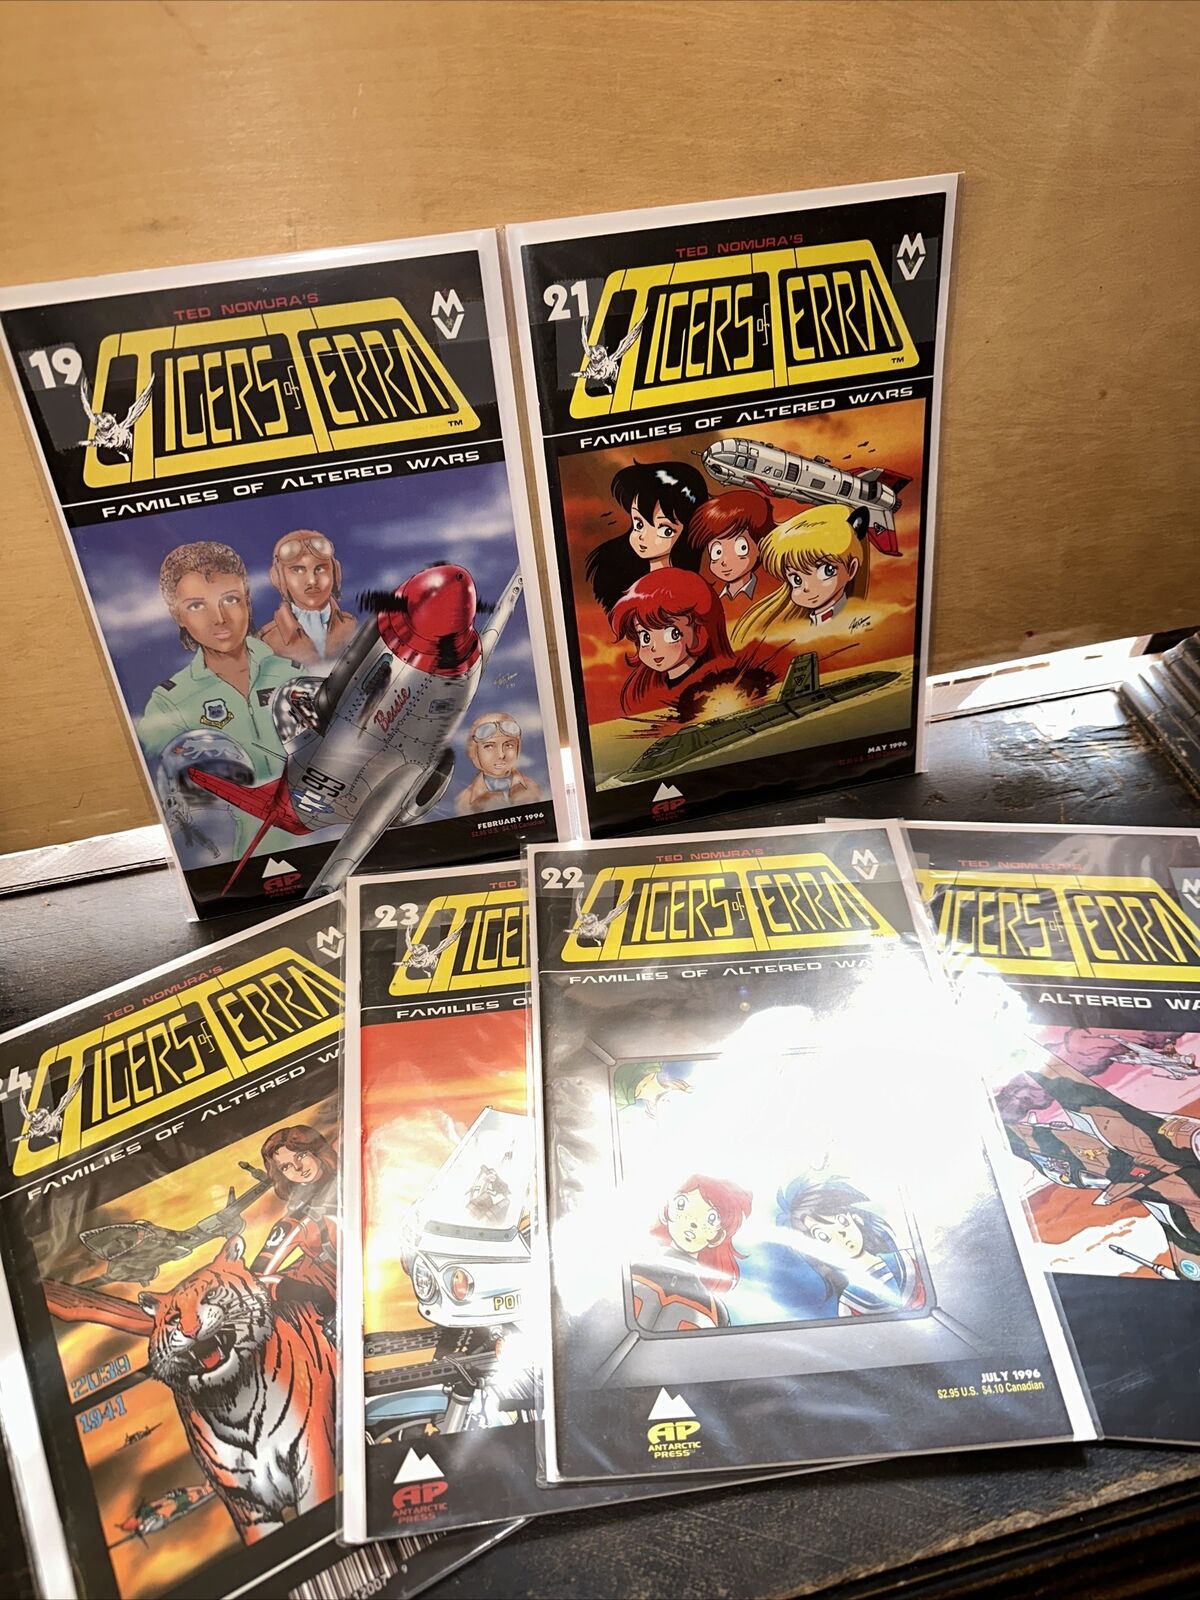 6 TIGERS OF TERRA  (Comic Books) Ted Nomura Various years 1996 & 97 Altered wars